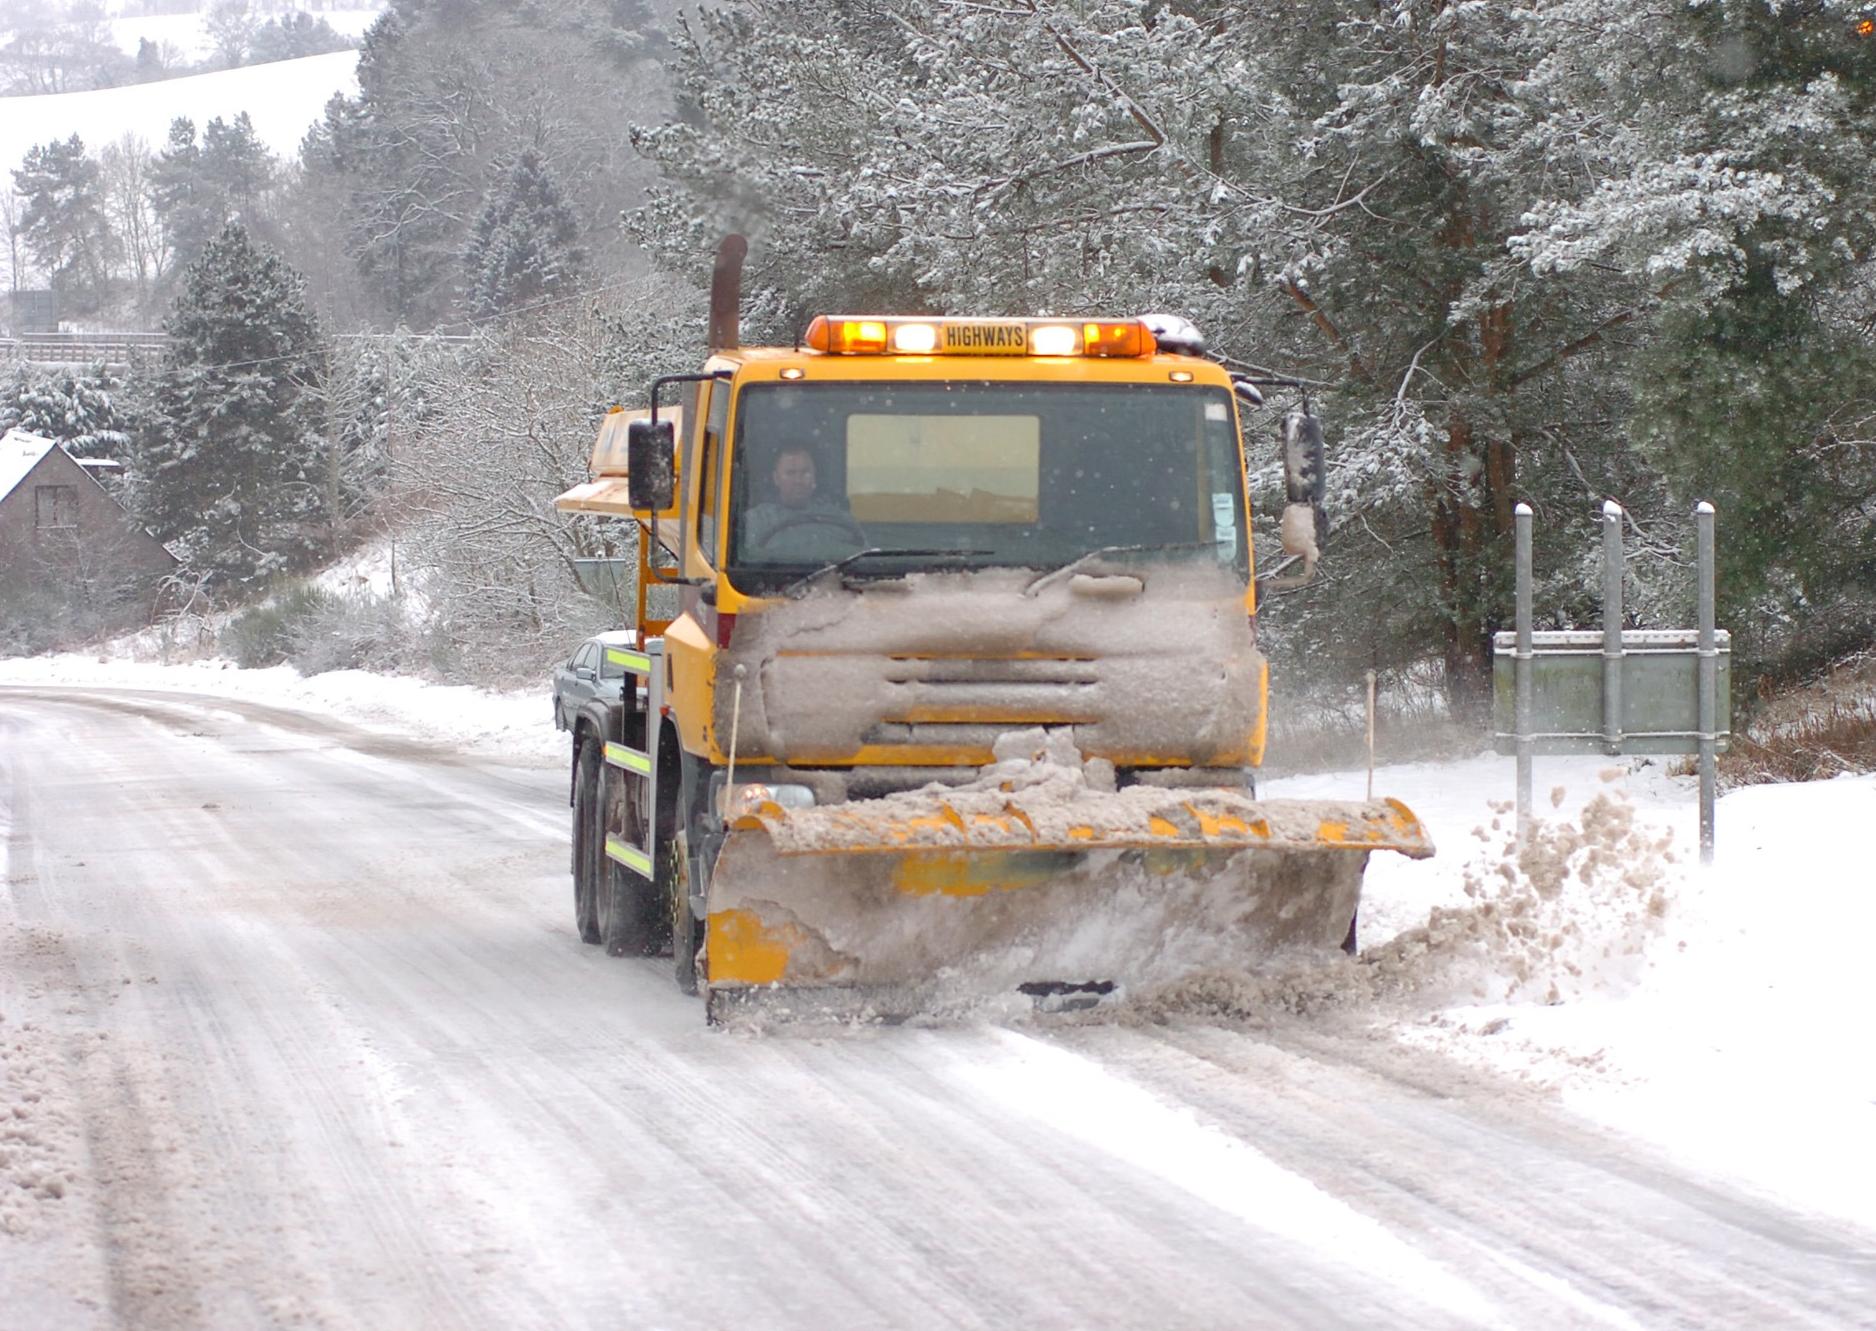 Scottish Borders gritter clearing the roads near Melrose.